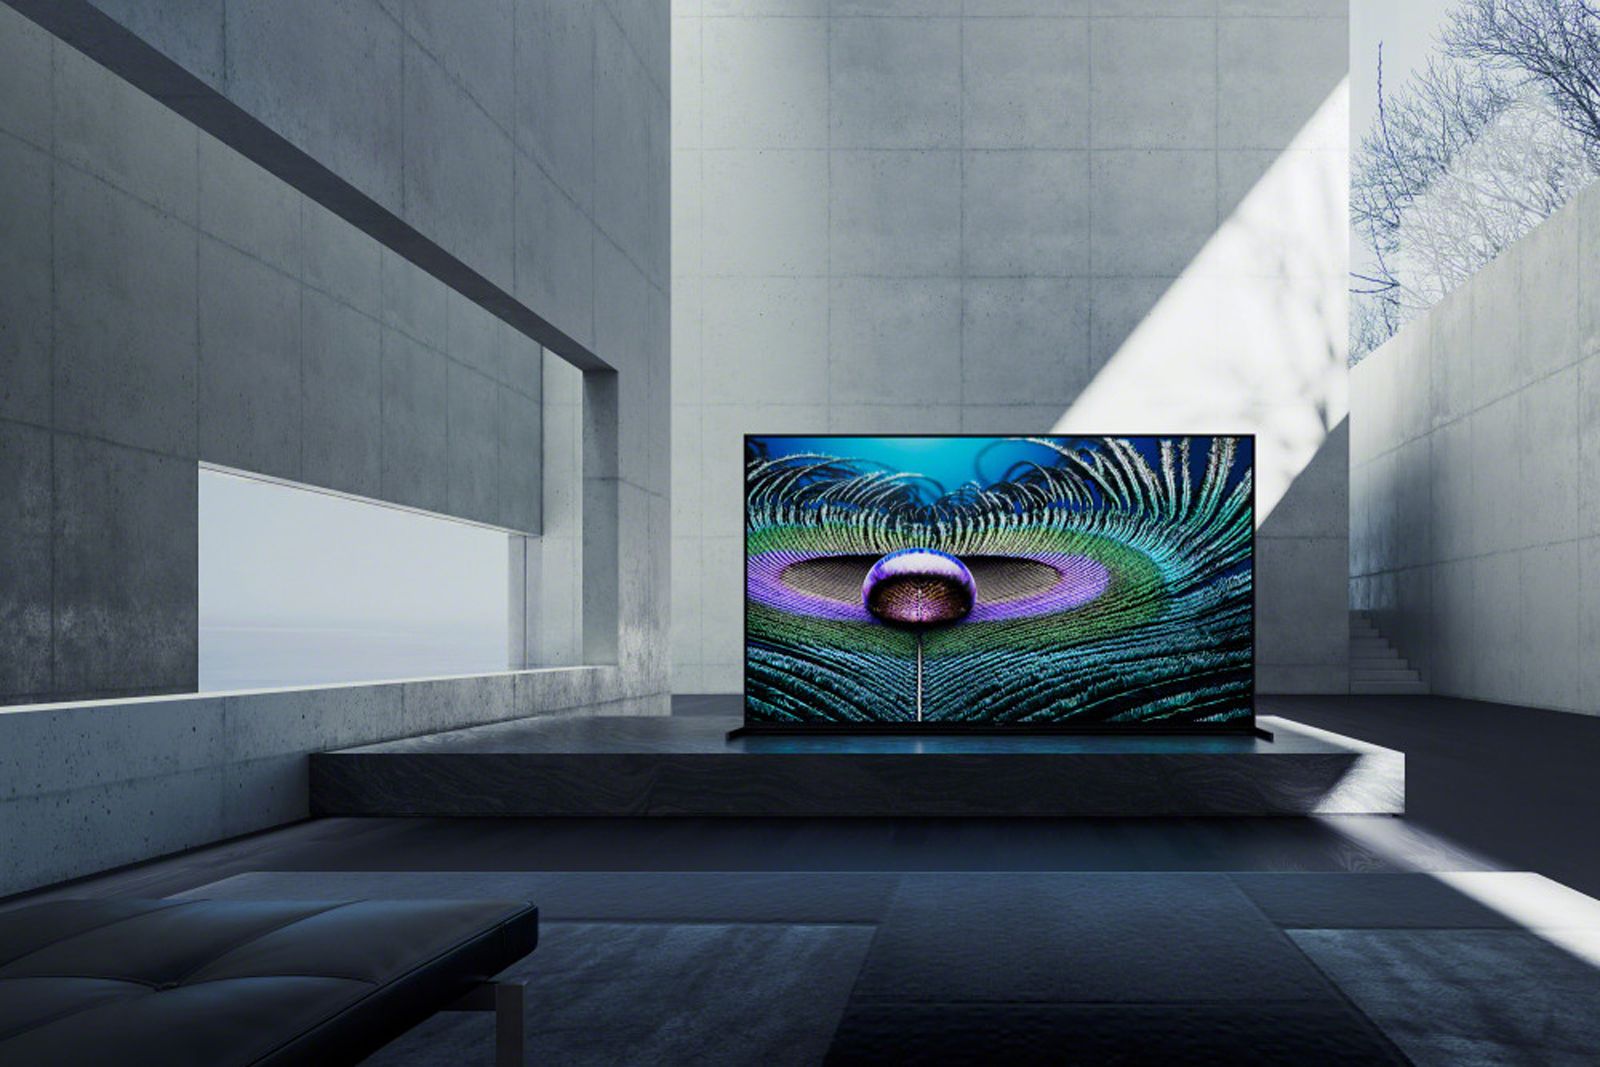 Sony's latest Bravia XR TVs are designed to more closely replicate what you see and hear photo 1